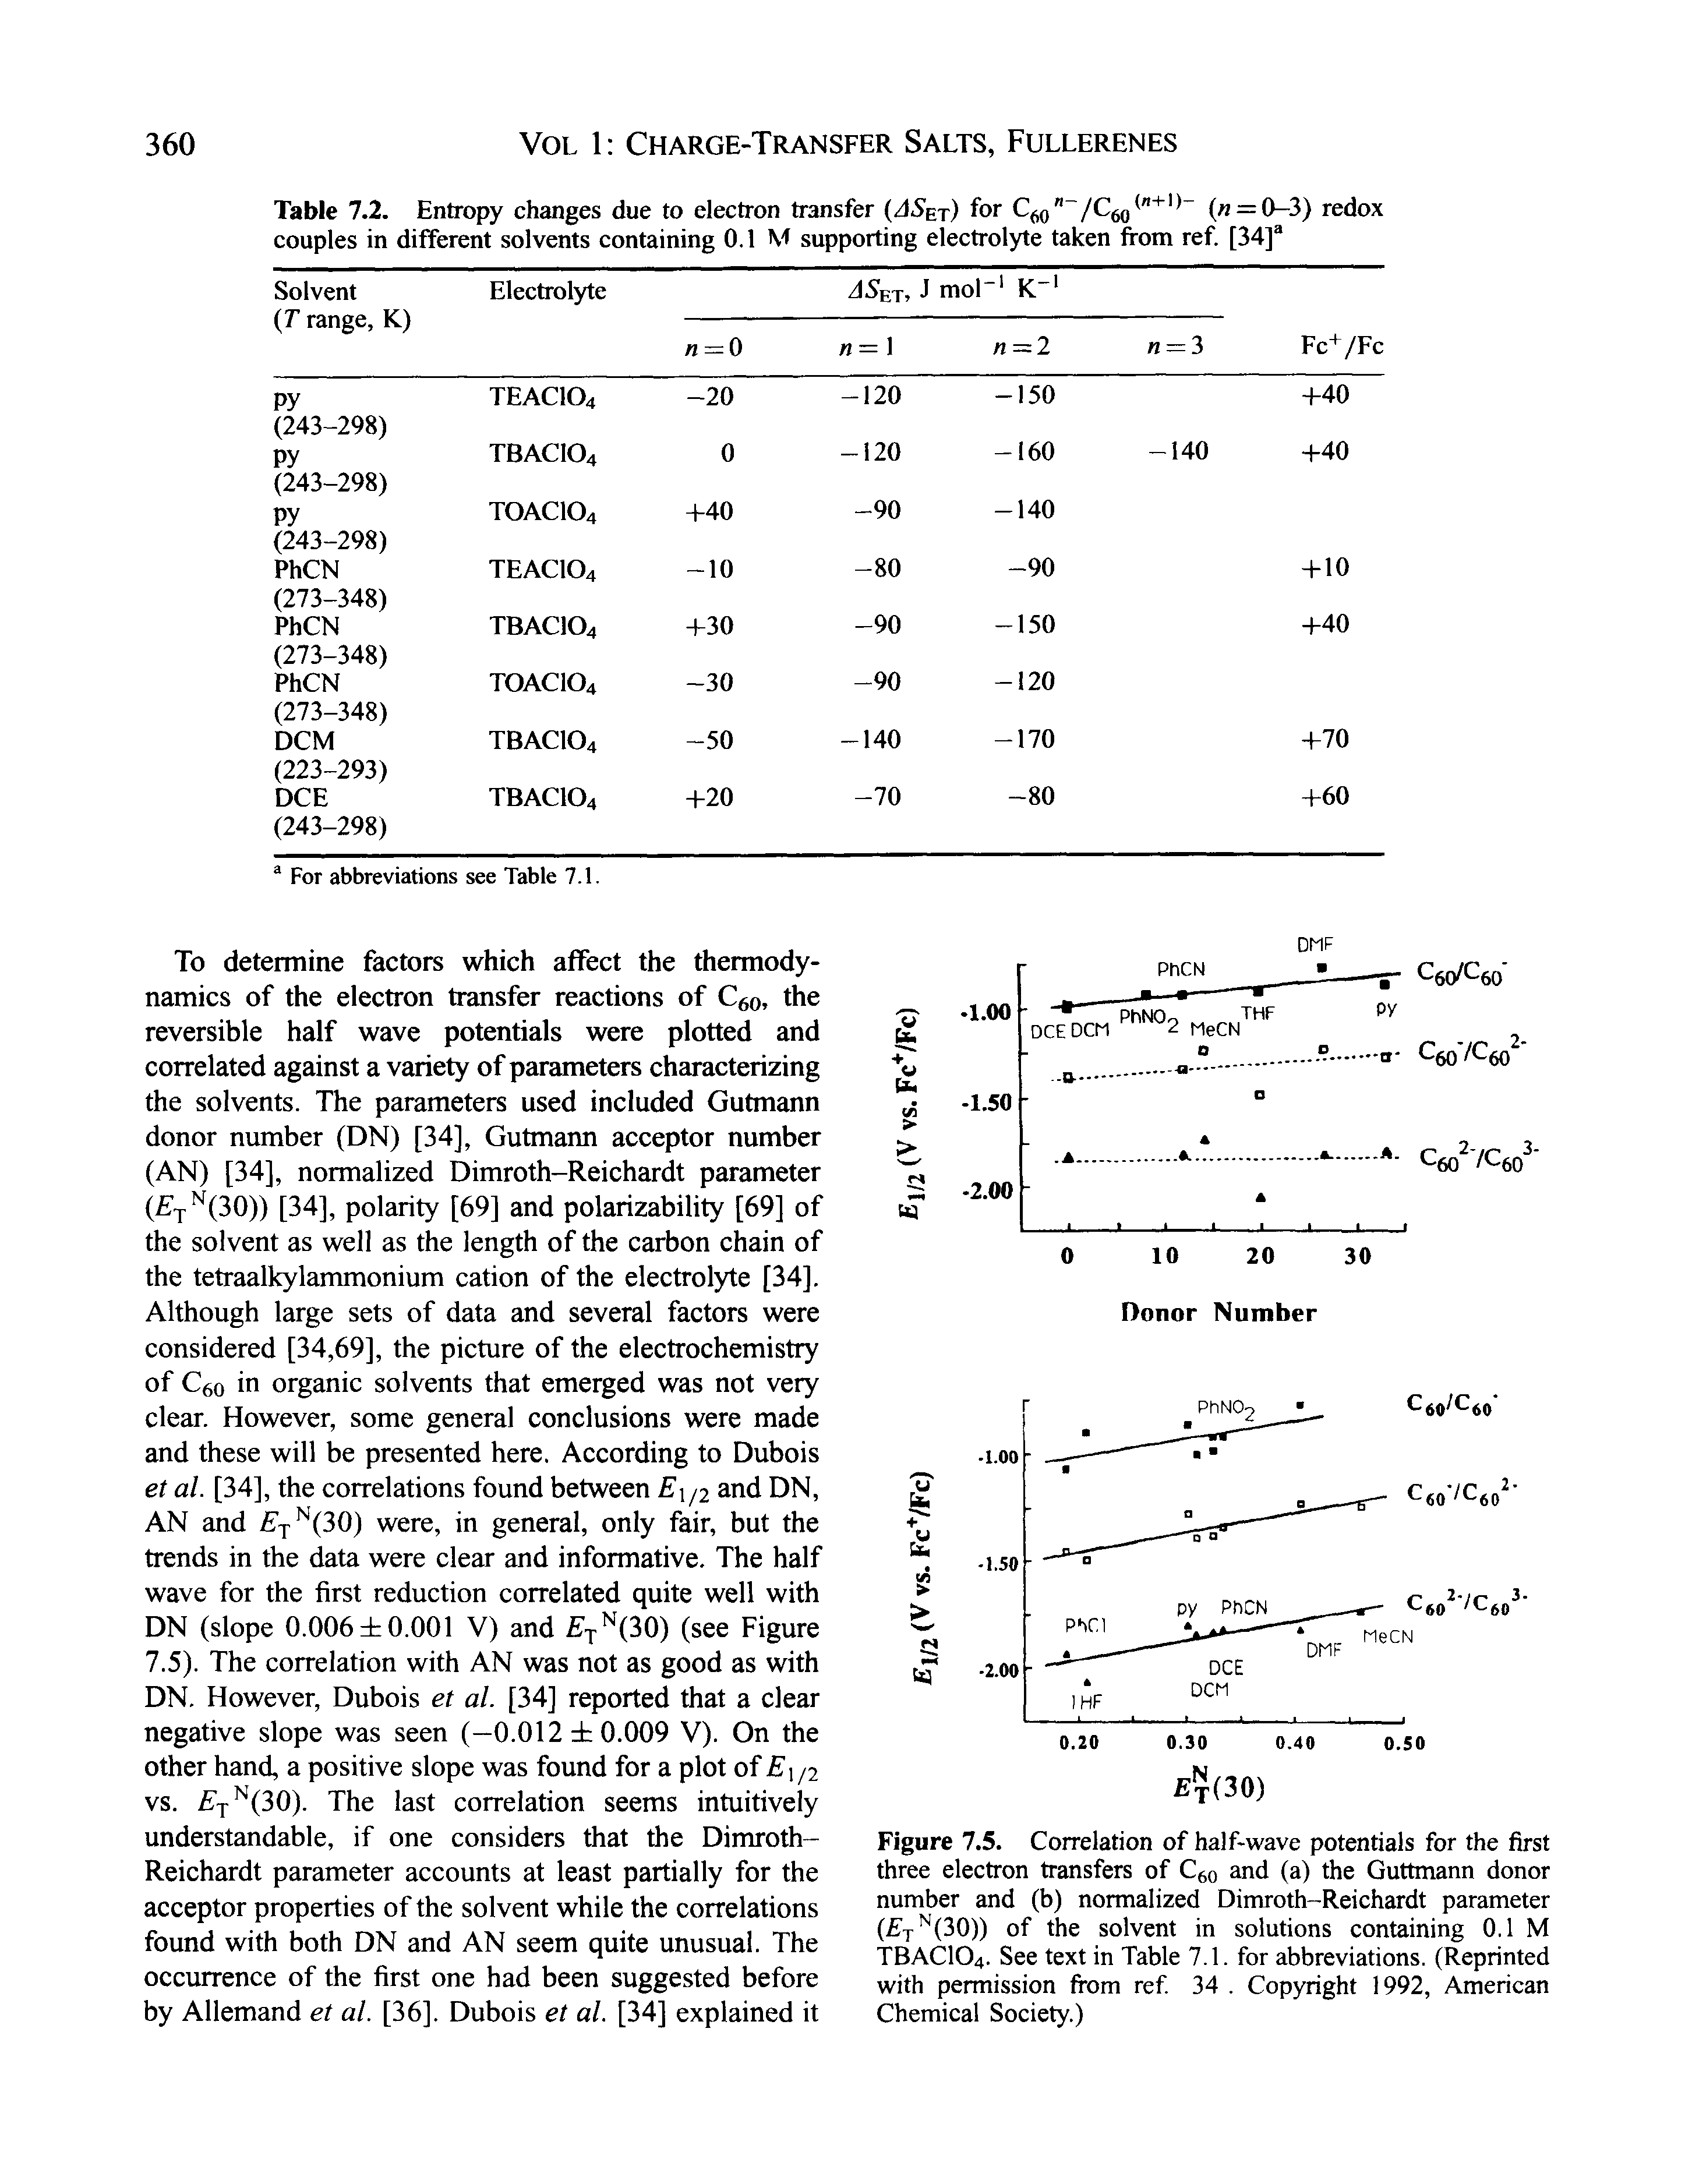 Figure 7.5. Correlation of half-wave potentials for the first three electron transfers of Ceo and (a) the Guttmann donor number and (b) normalized Dimroth-Reichardt parameter ( -r (30)) of the solvent in solutions containing 0,1 M TBACIO4. See text in Table 7.1. for abbreviations. (Reprinted with permission from ref 34. Copyright 1992, American Chemical Society.)...